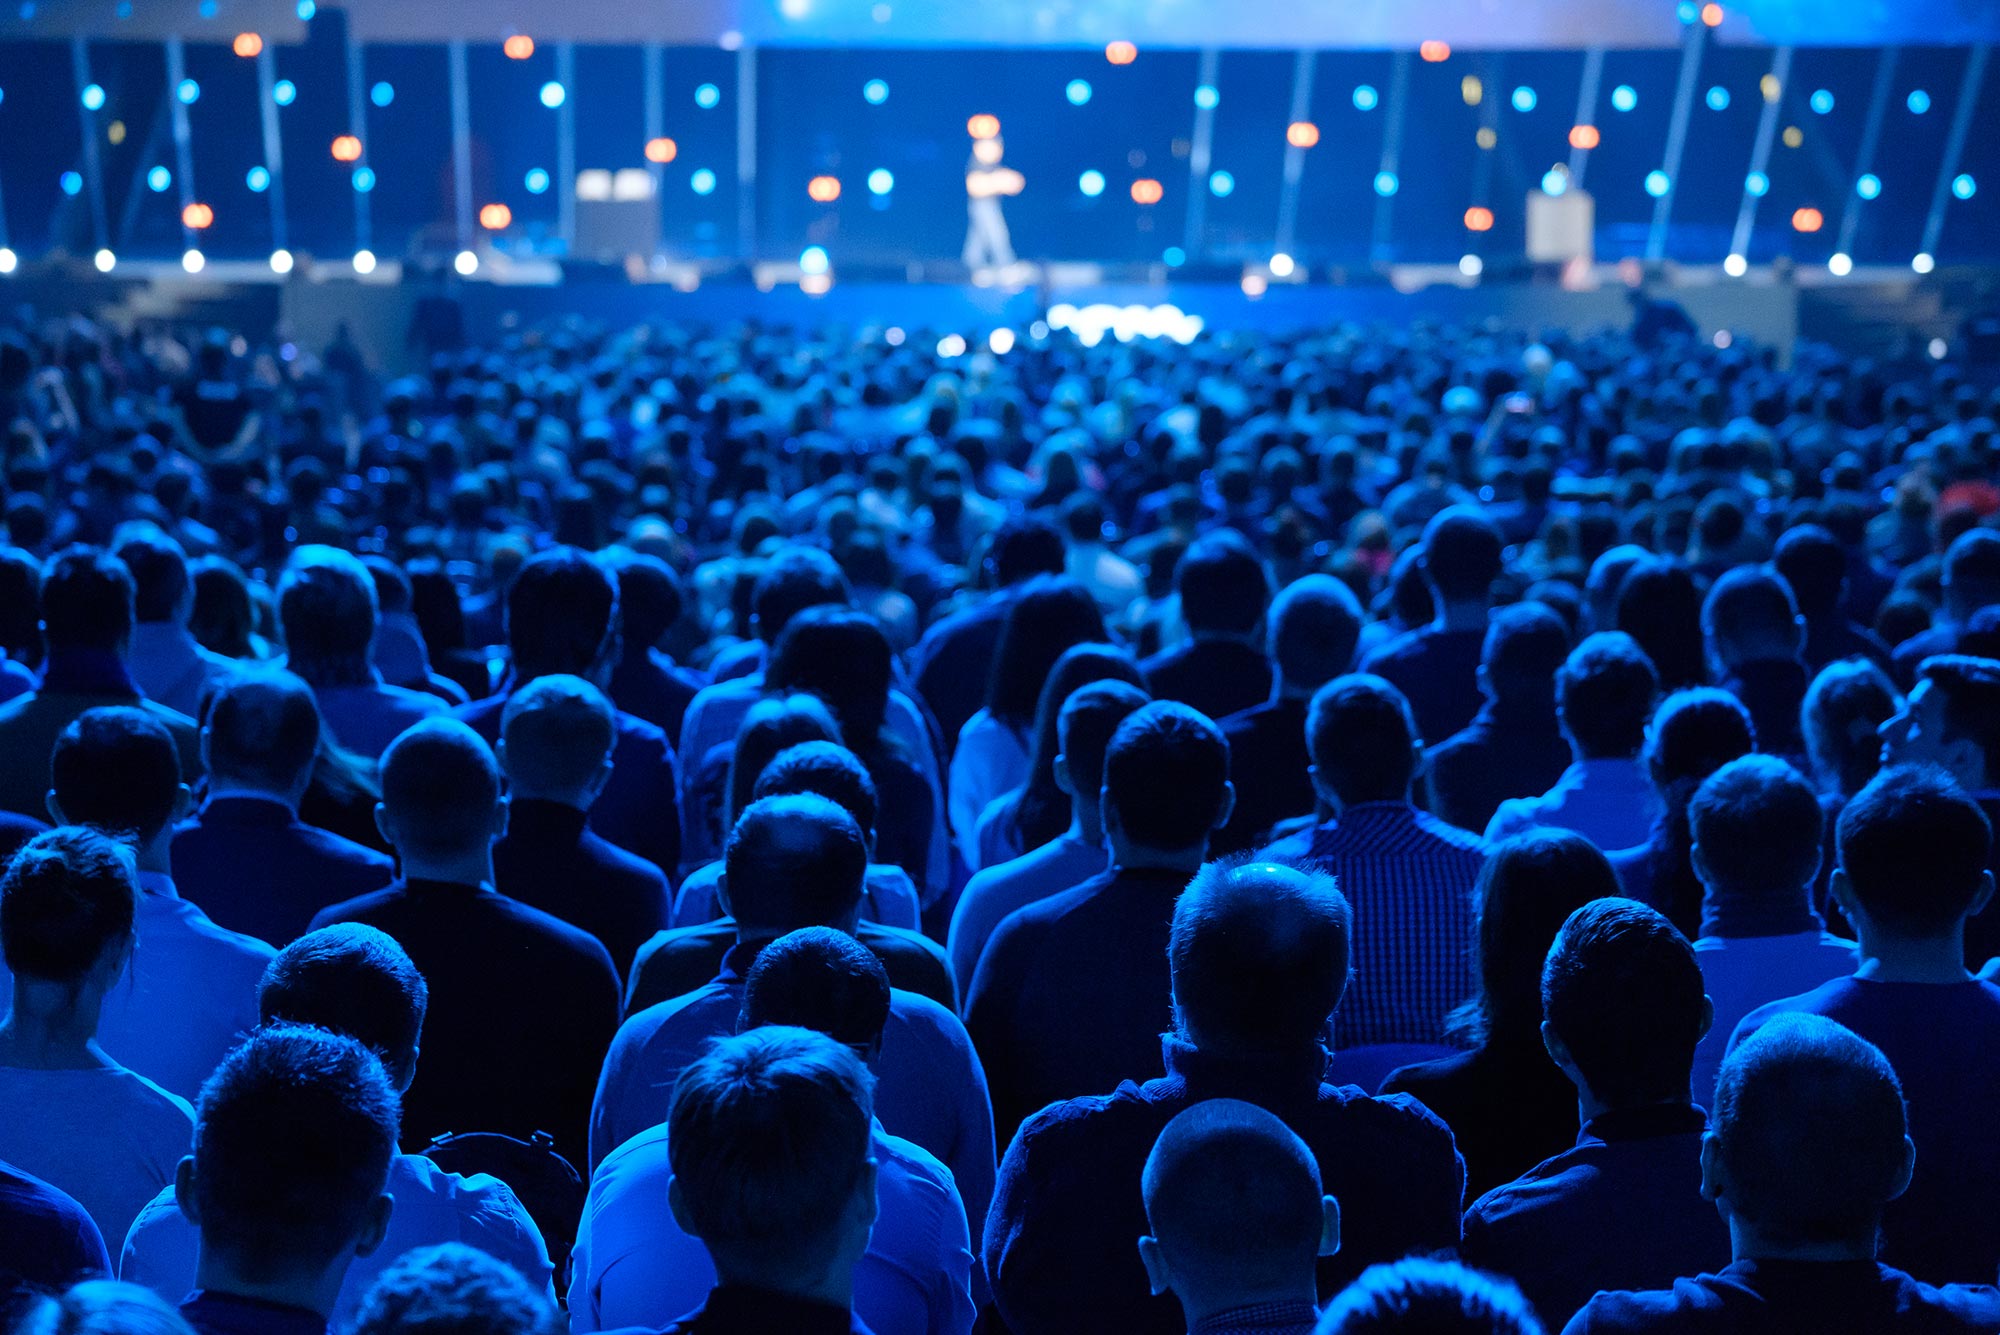 Photo of a large performance/event venue filled with people who listen to a speaker on stage. The photo is taken from the behind the audience and captures the blue-lighting used at the event.